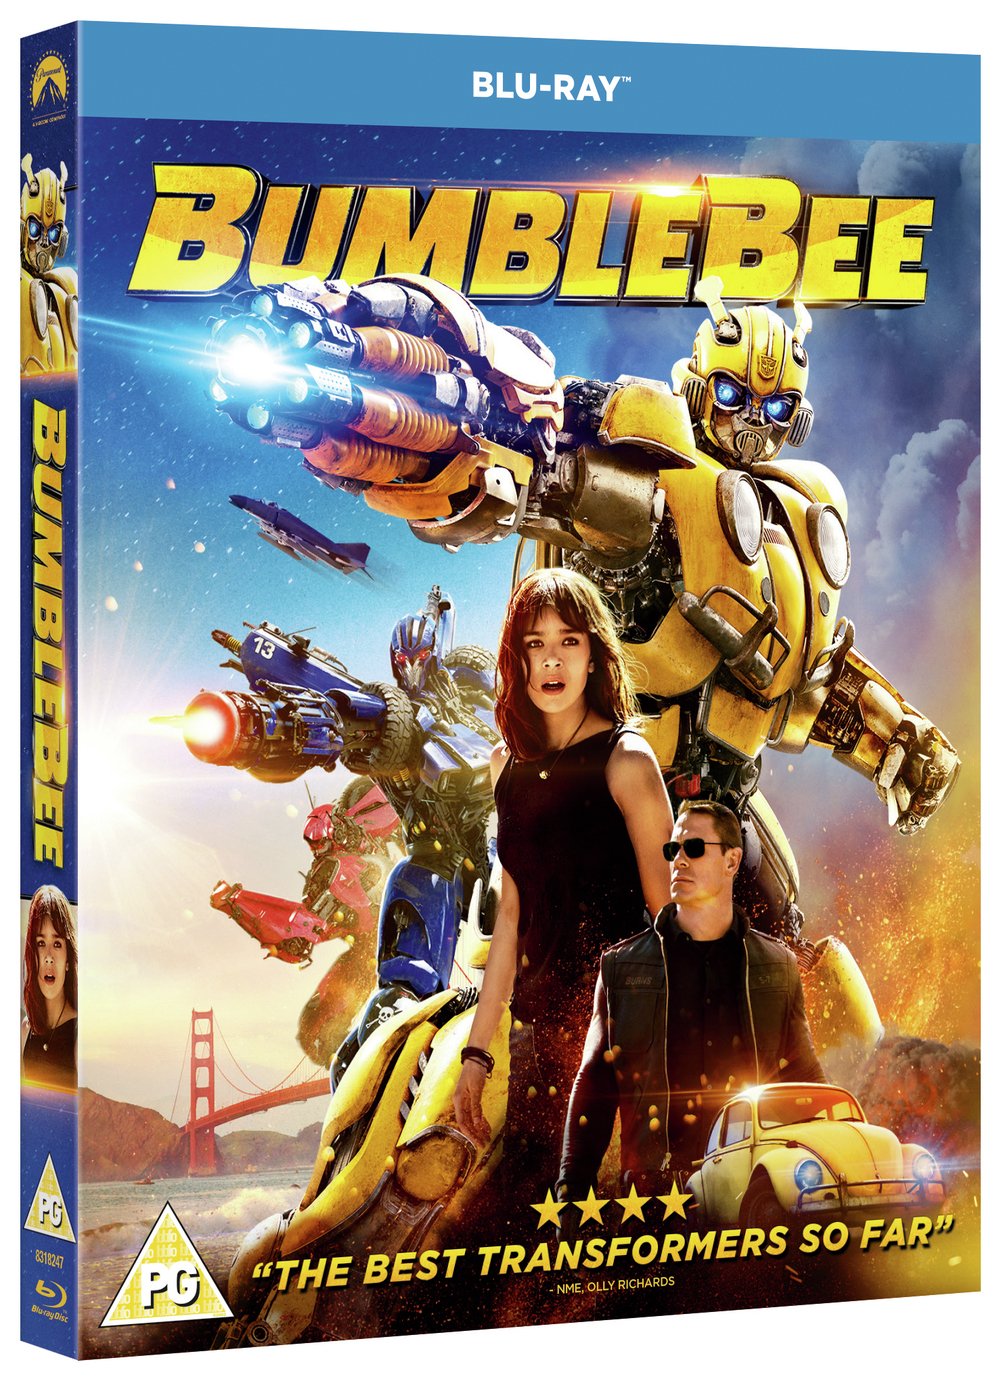 Bumblebee Blu-Ray Review